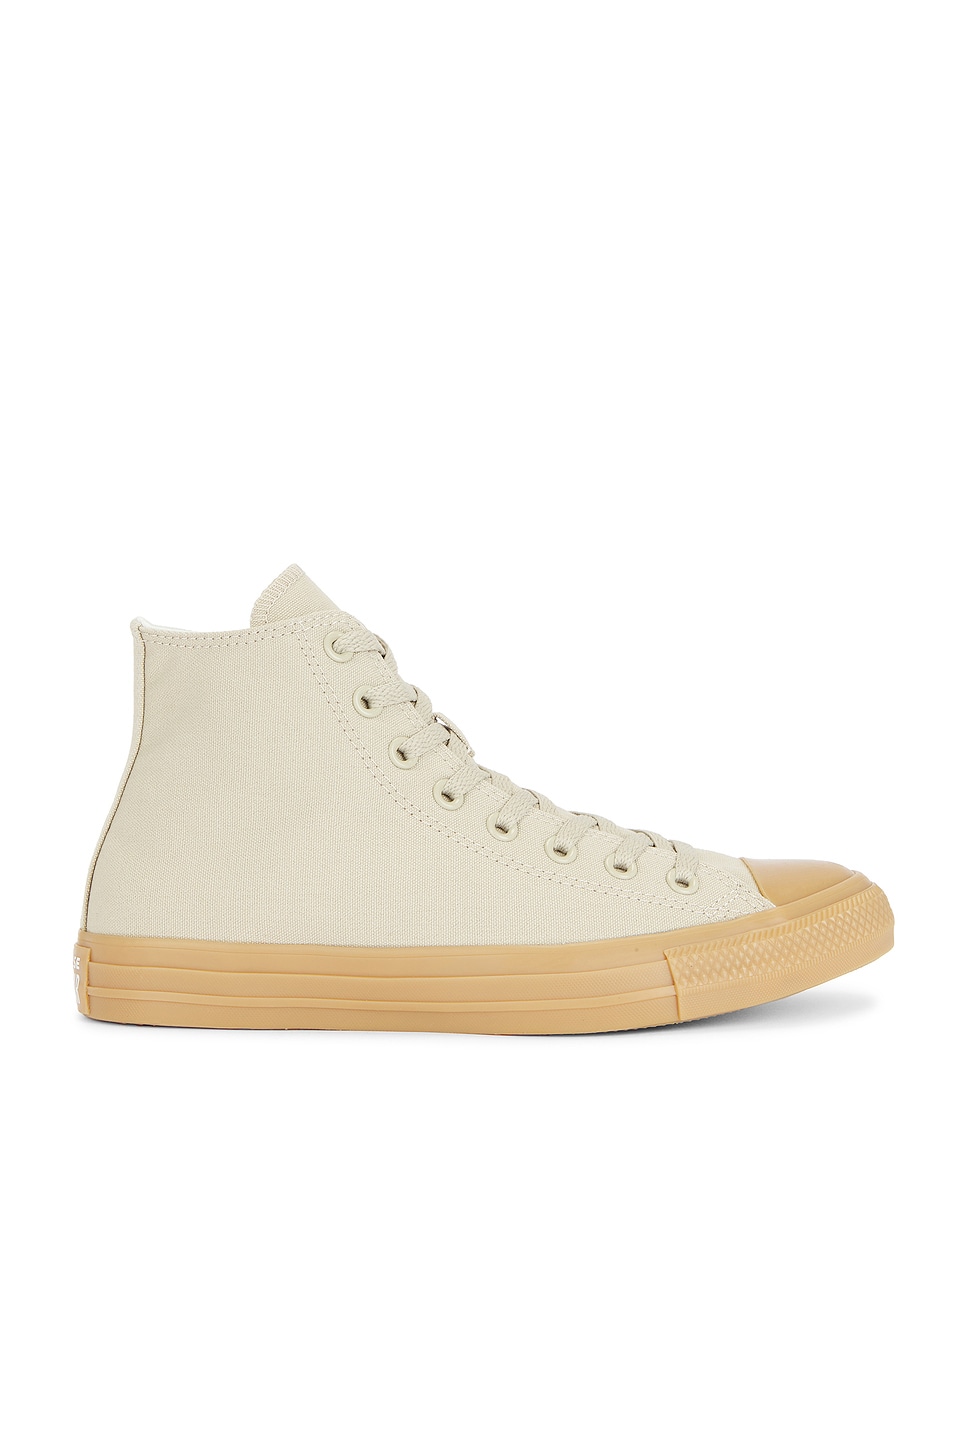 Image 1 of Converse Chuck Taylor All Star in Beach Stone, Vintage White, & Light Gum